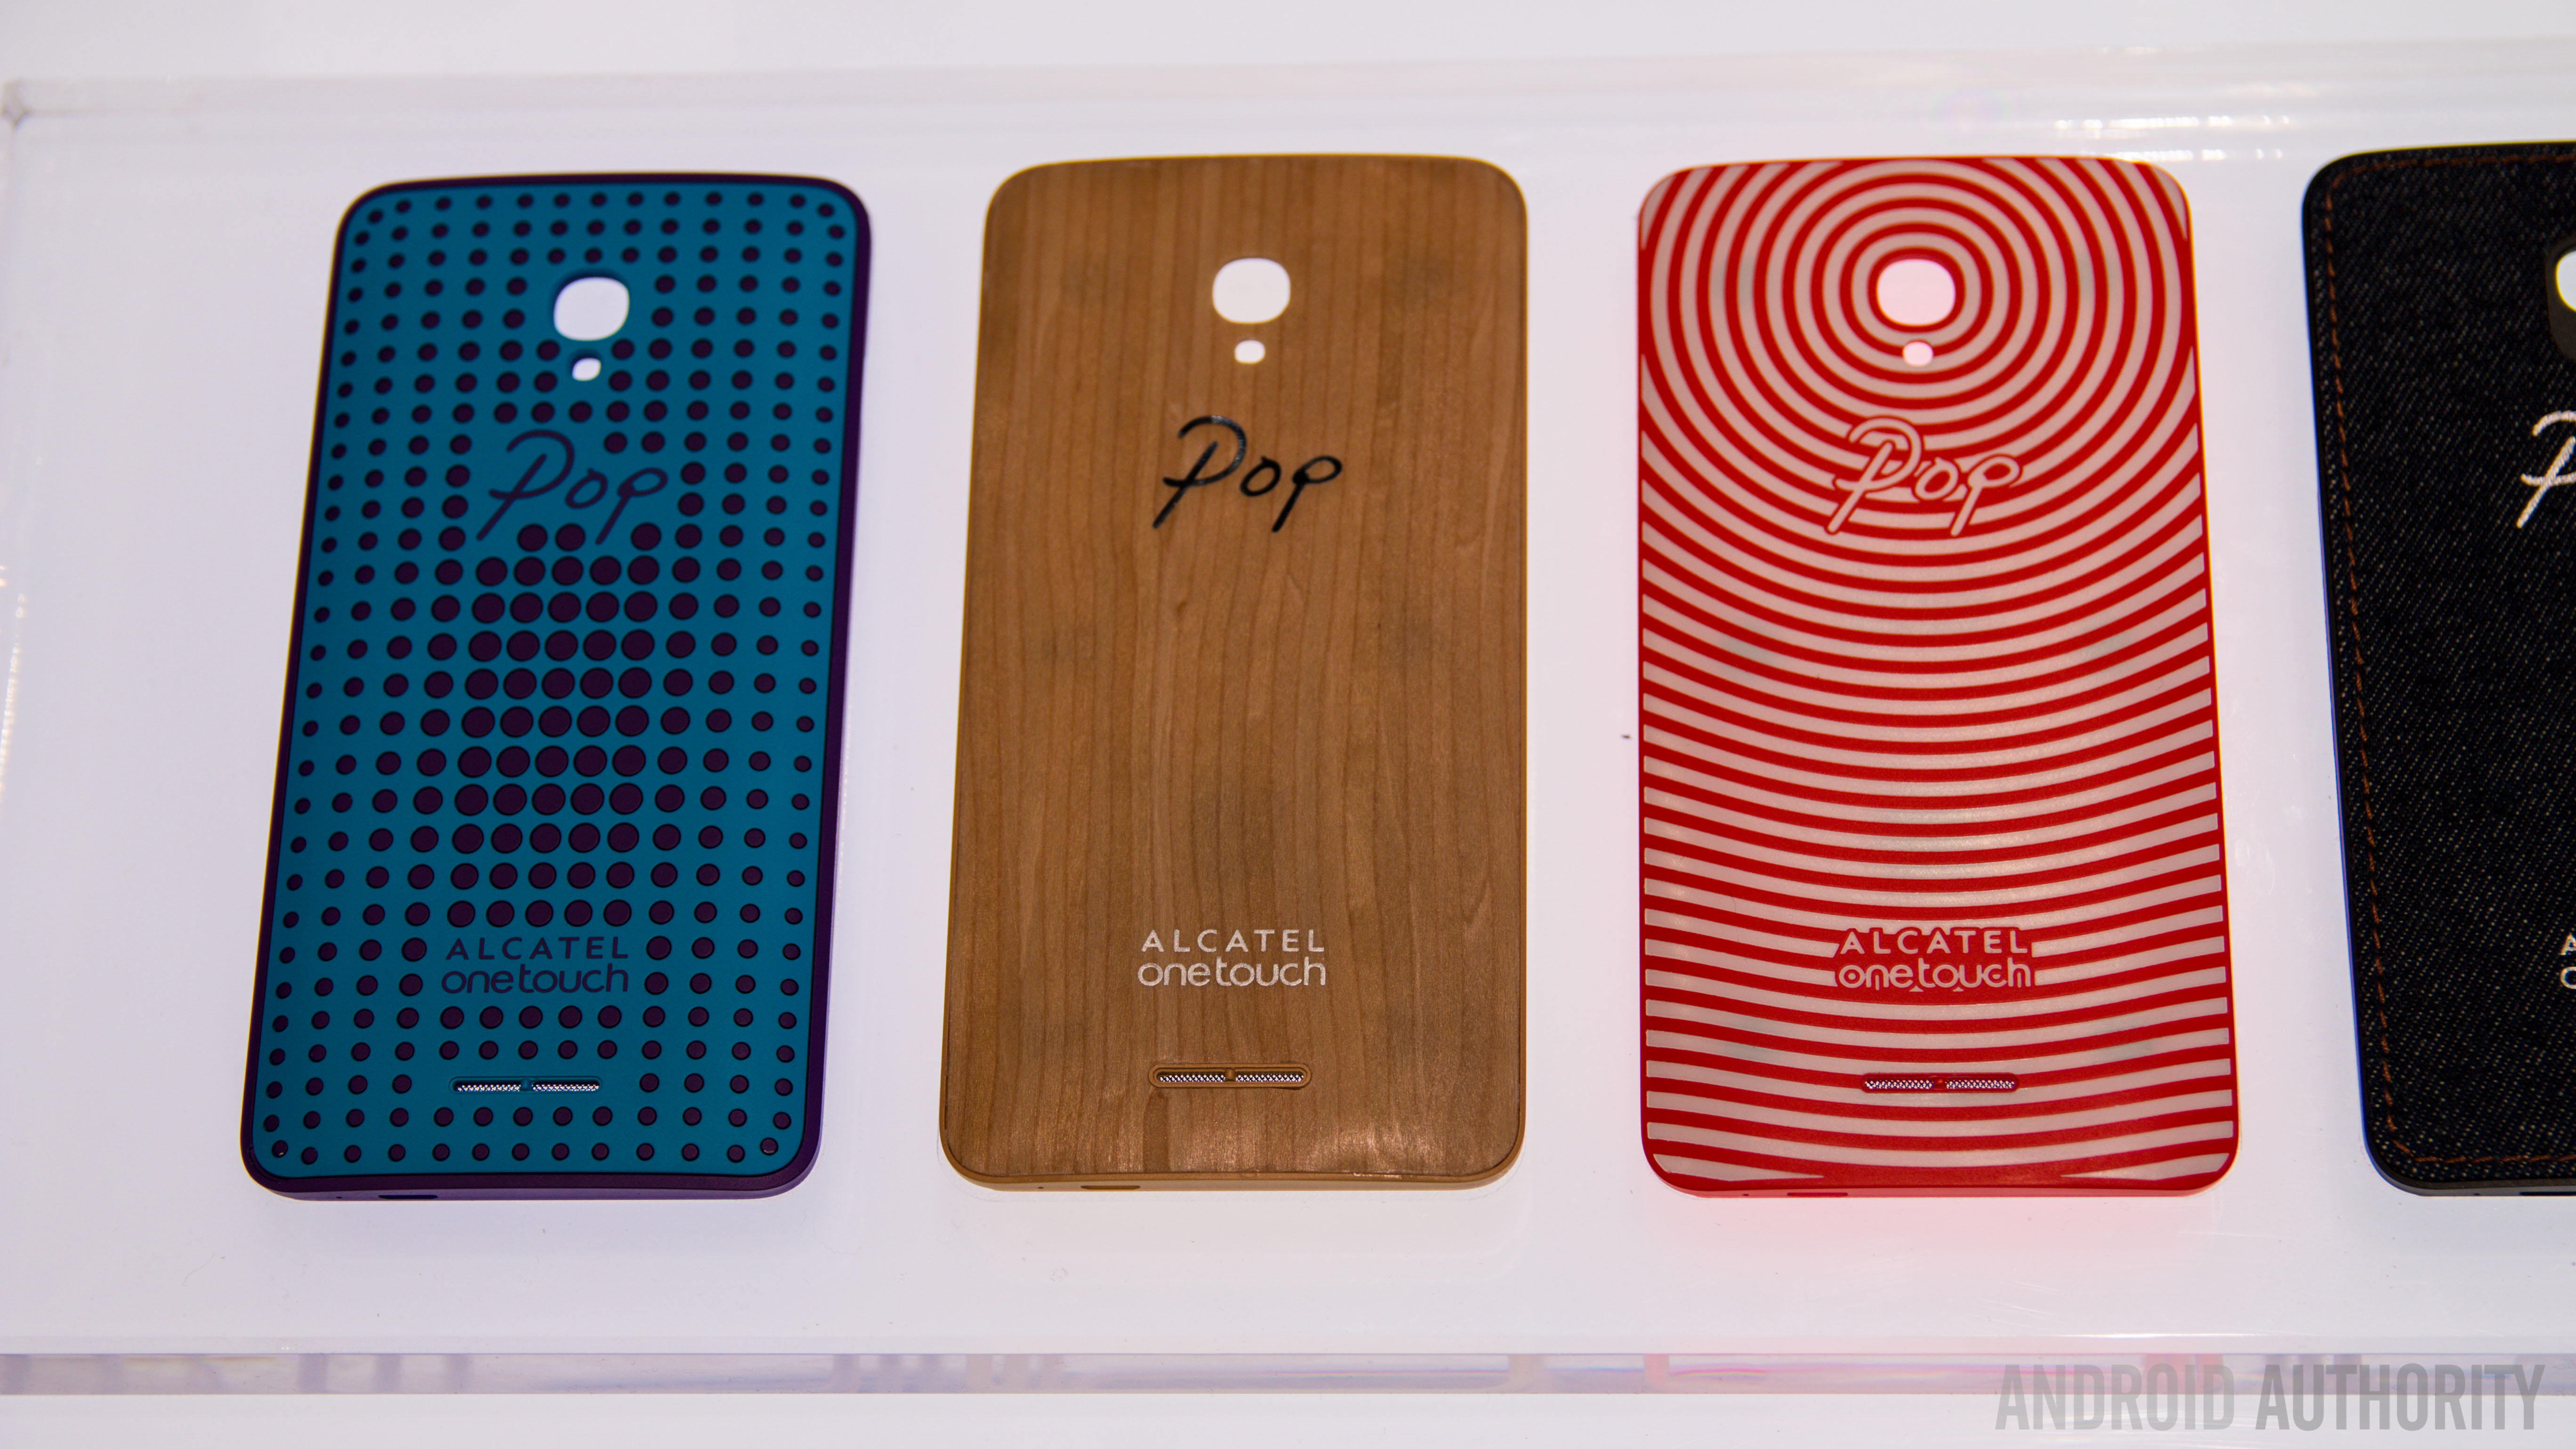 pakket grens Gezichtsveld Hands on with Alcatel OneTouch's new smartphones at IFA